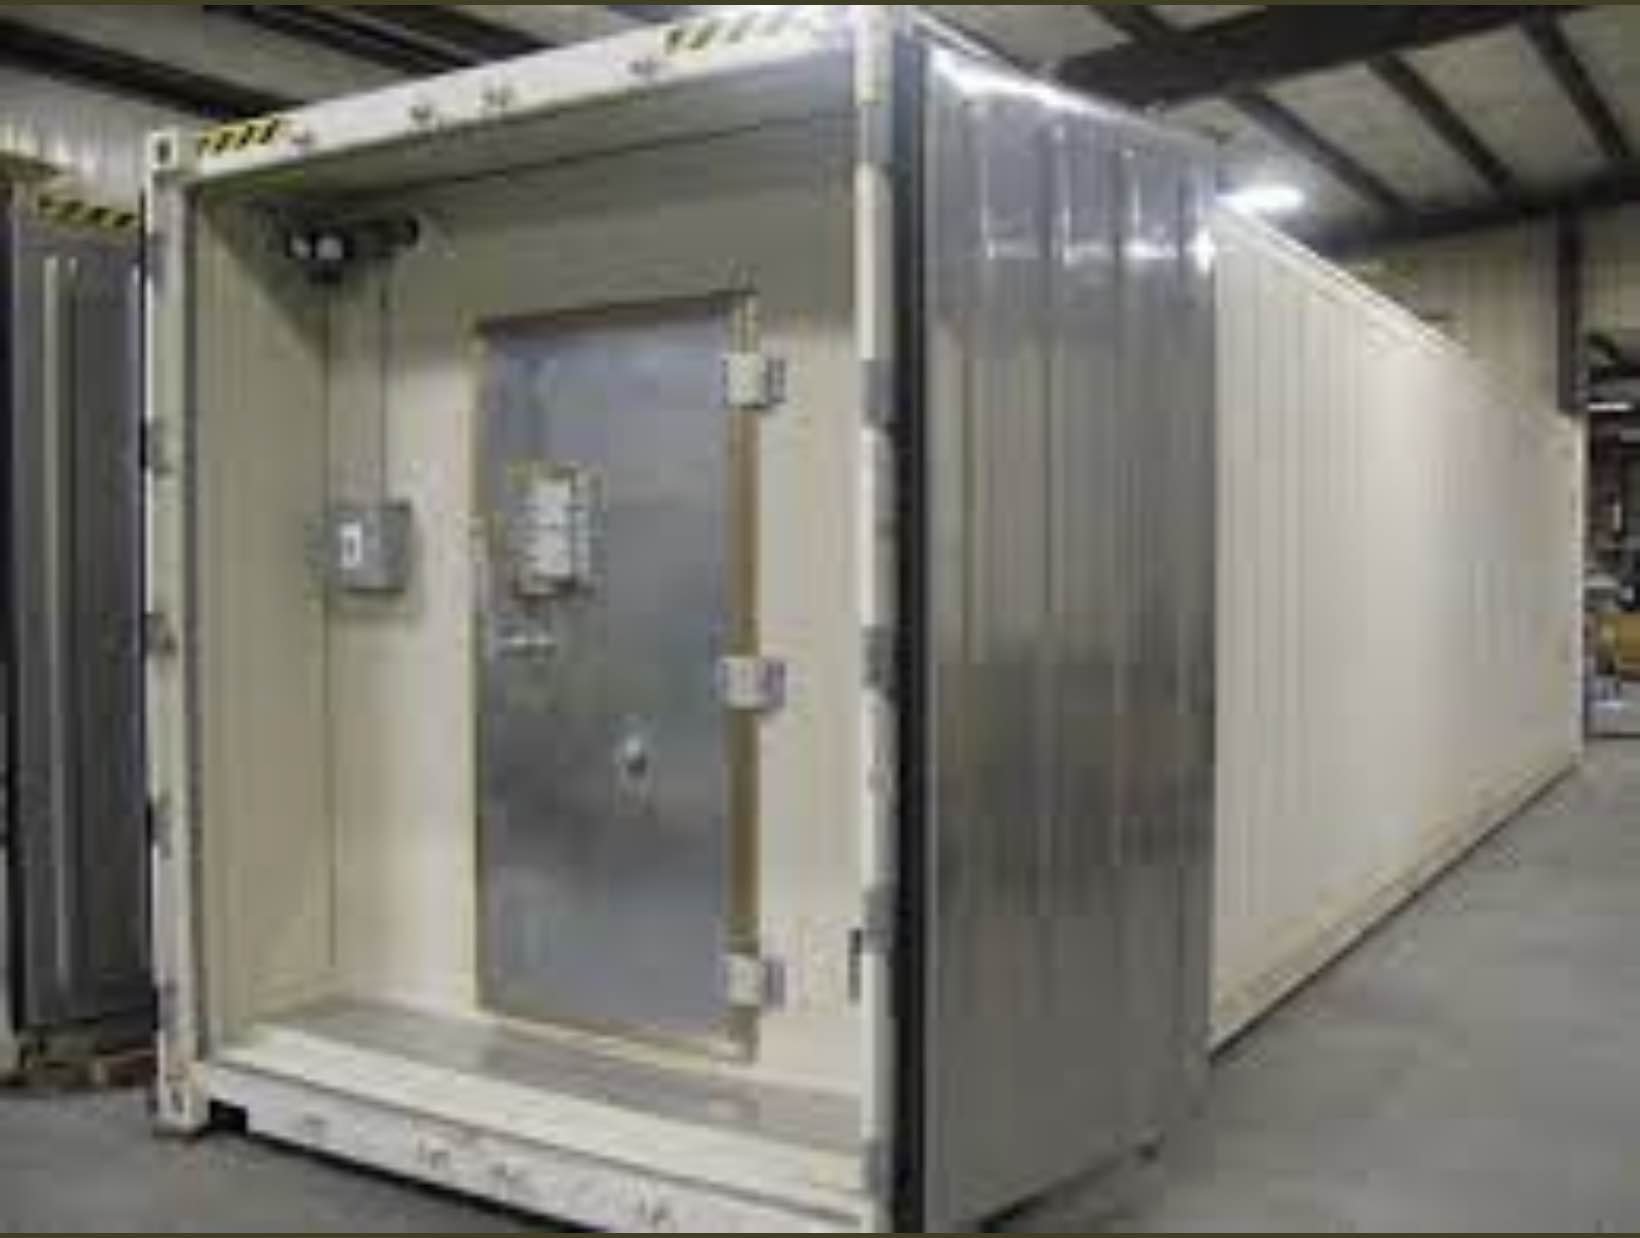 Sensitive compartmented information facility